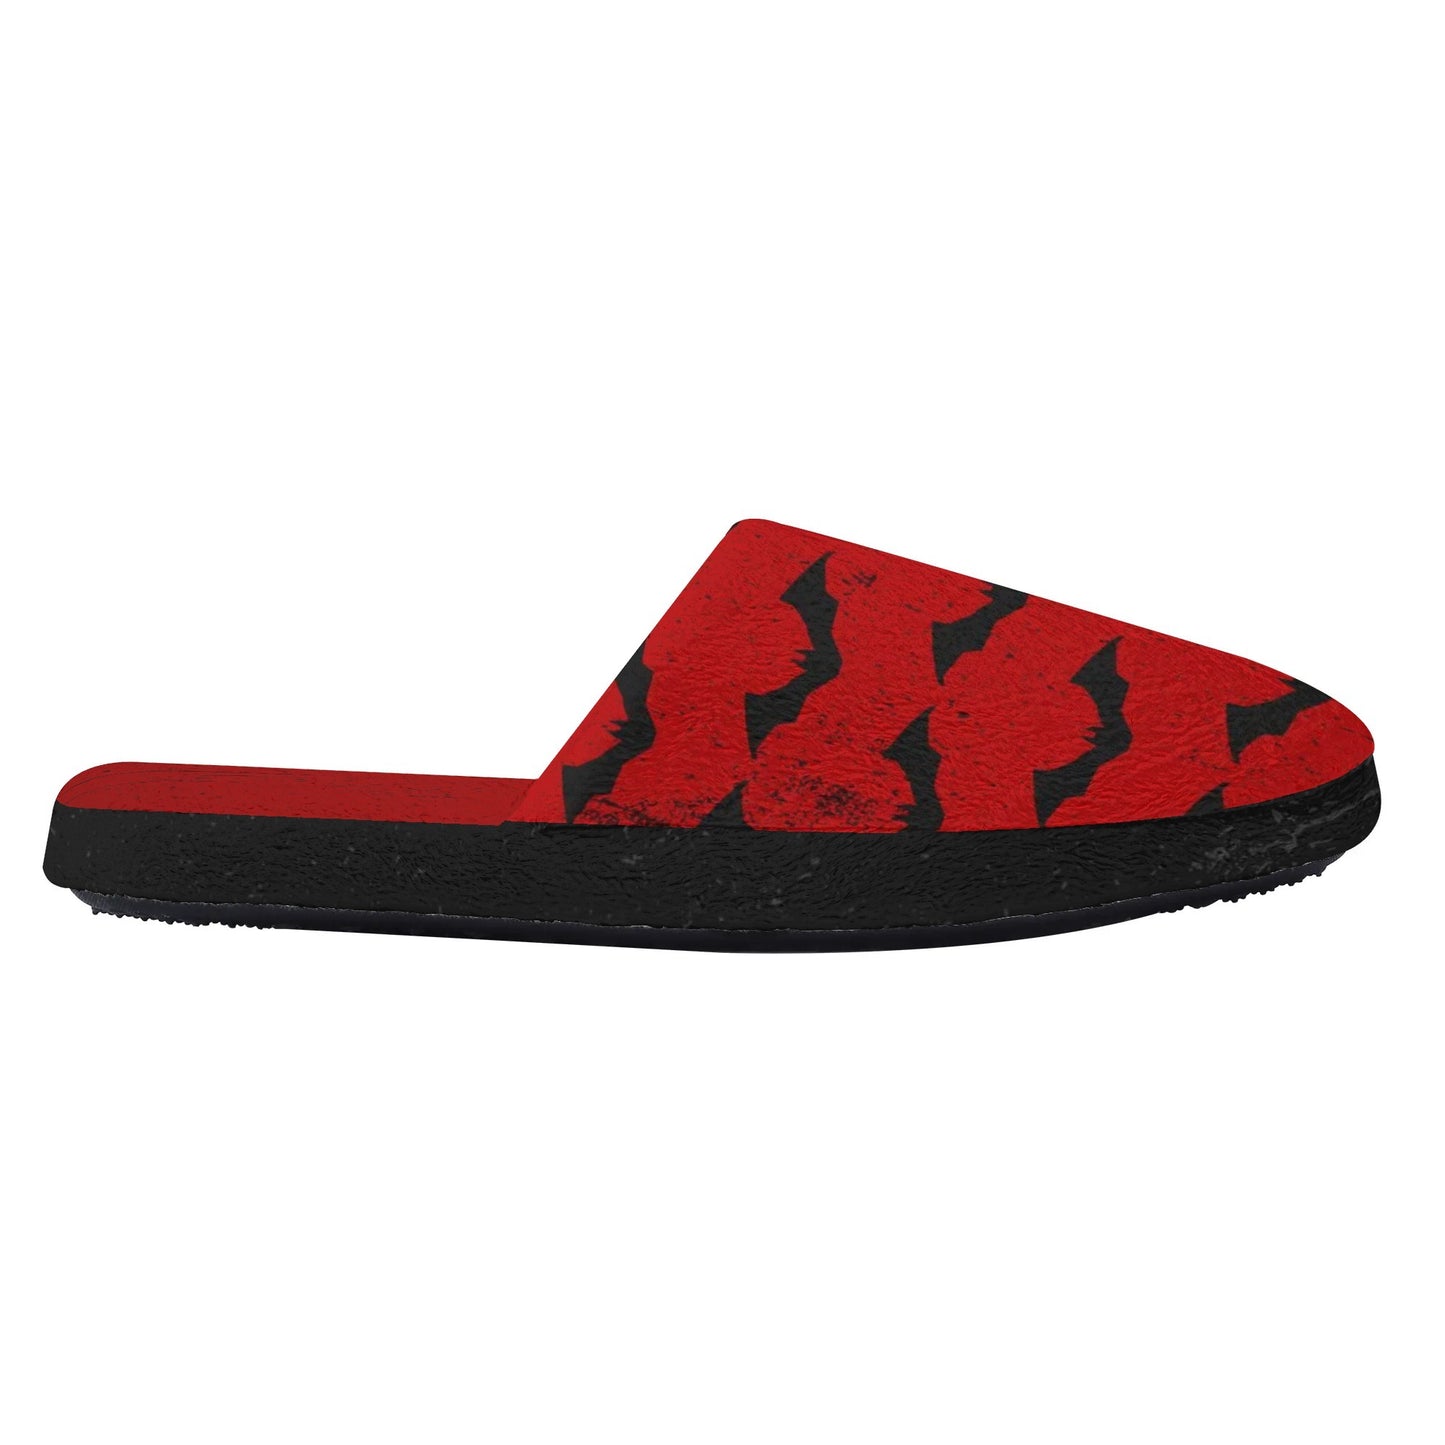 Nightwing / Red Women's Slippers